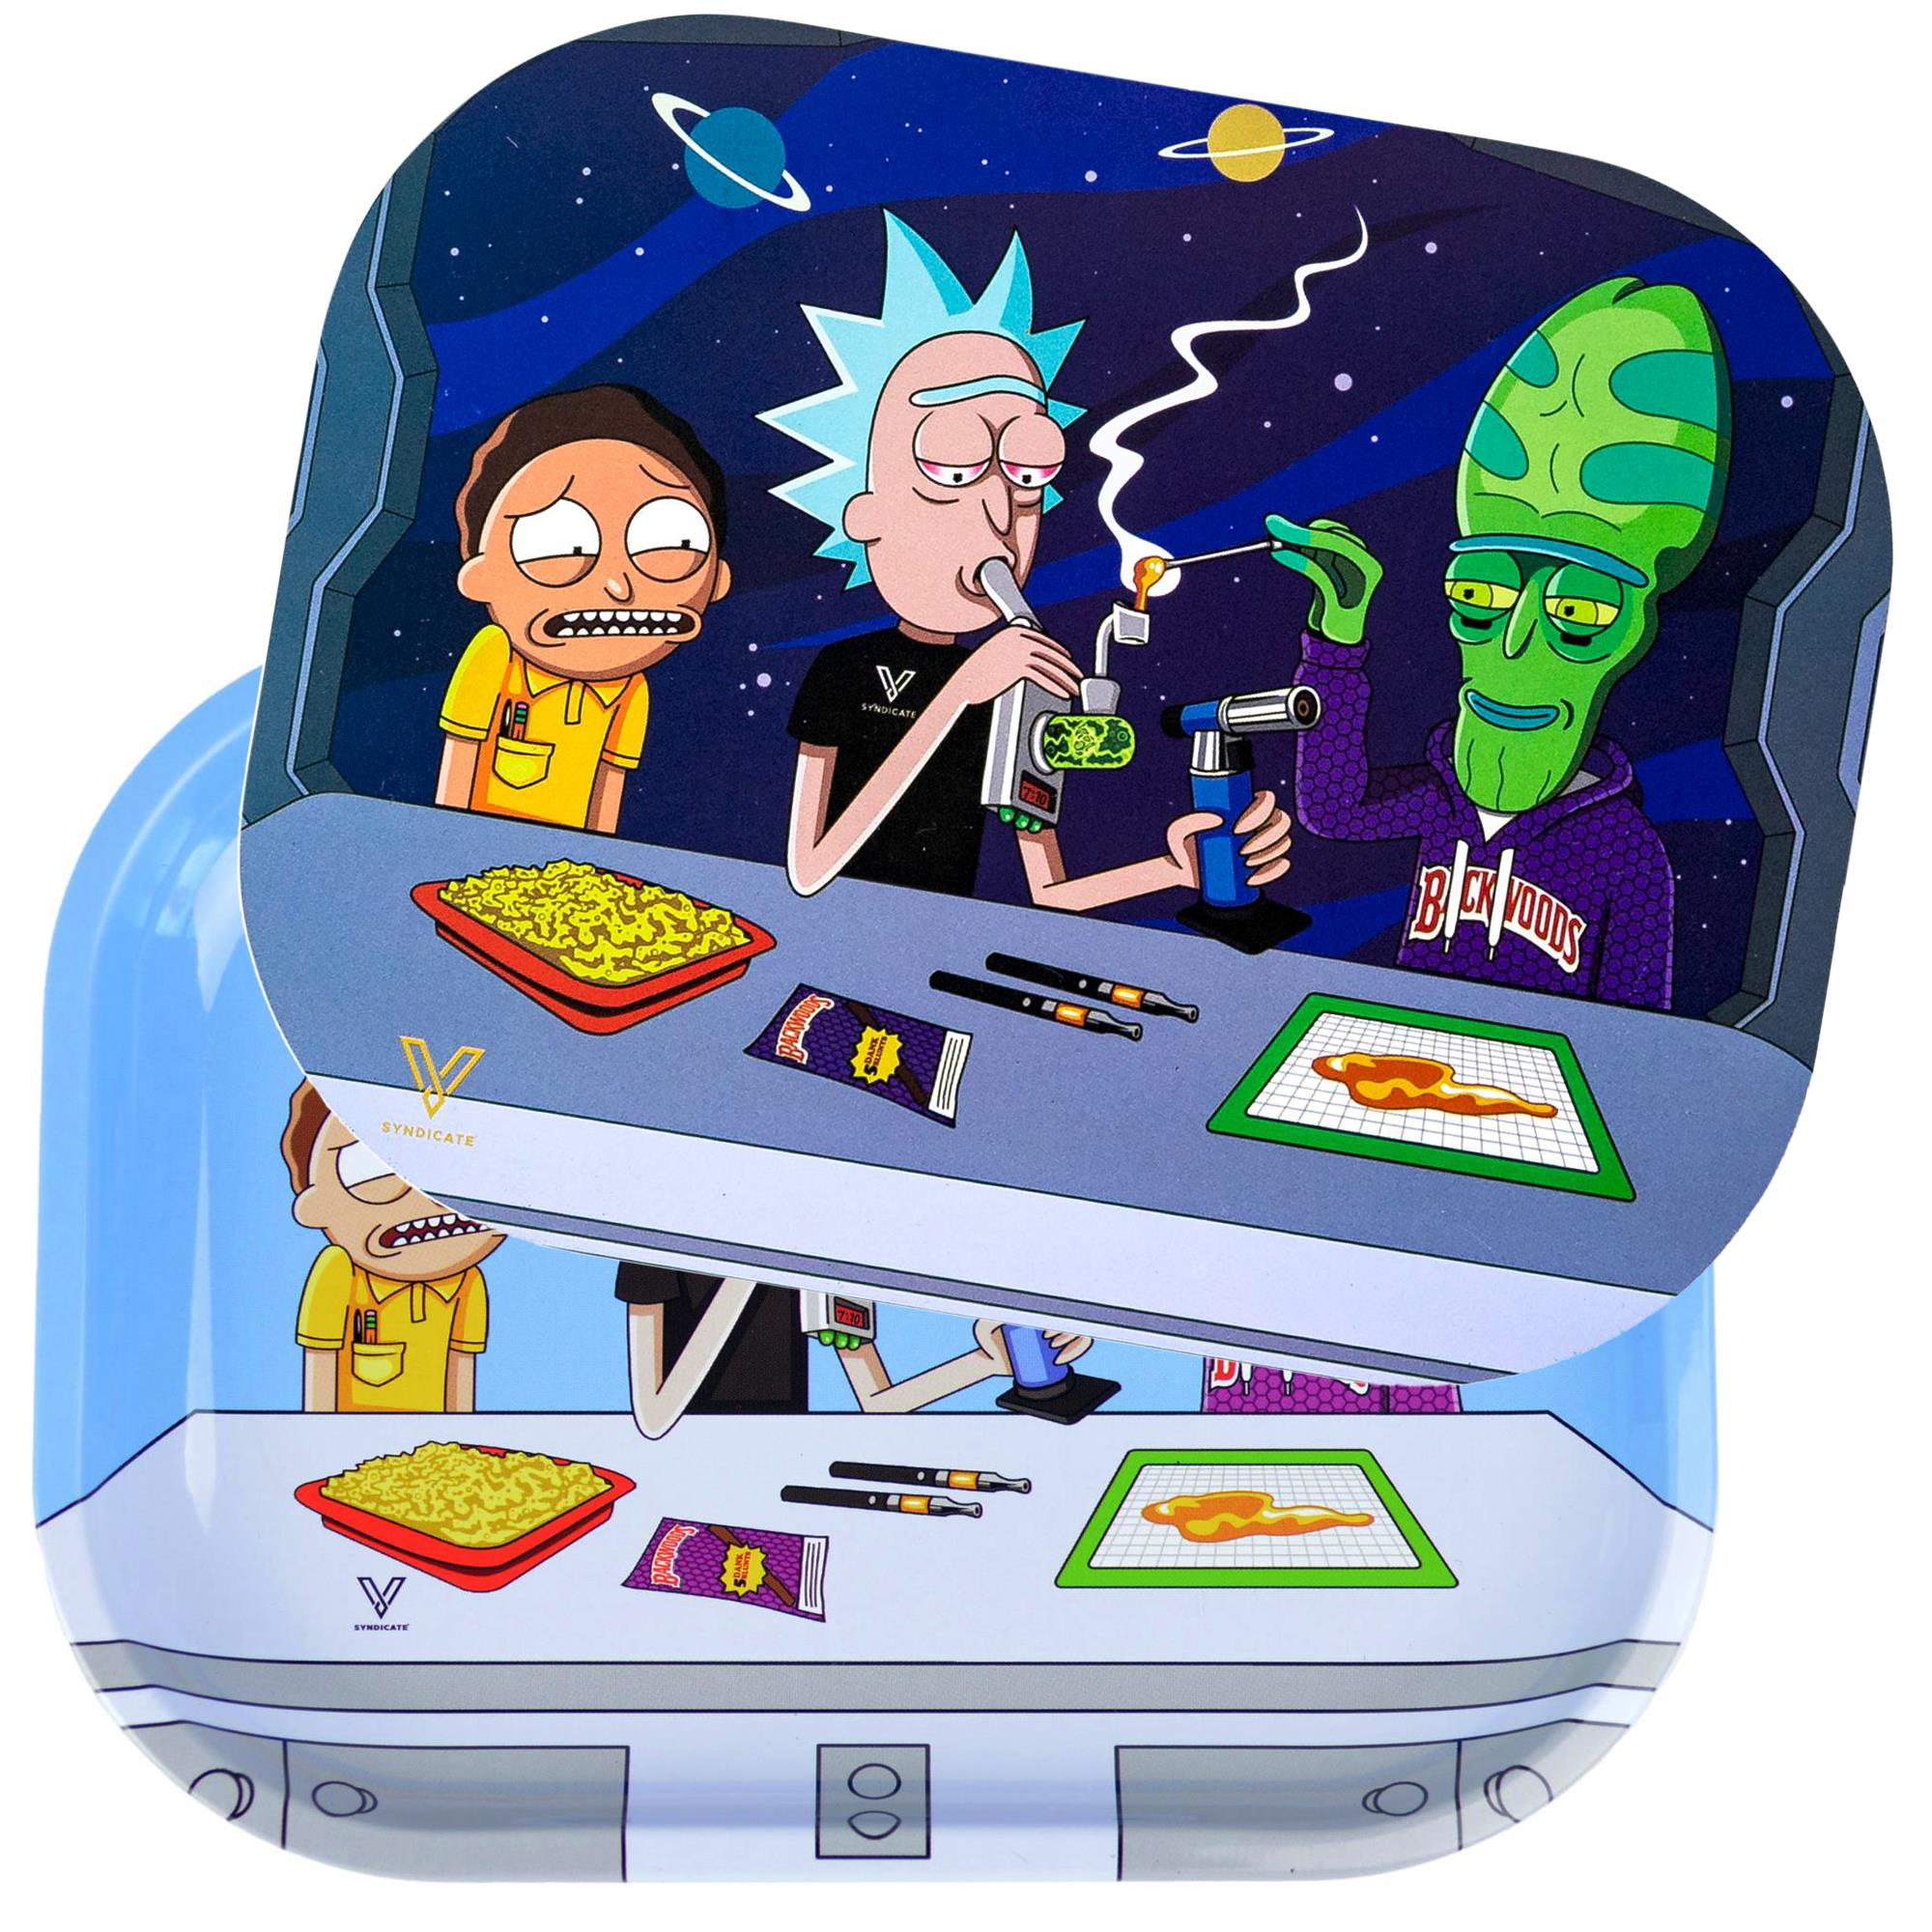 Rick & Morty Rick & Morty Space Rush Medium Tray Rolling Papers & Supplies